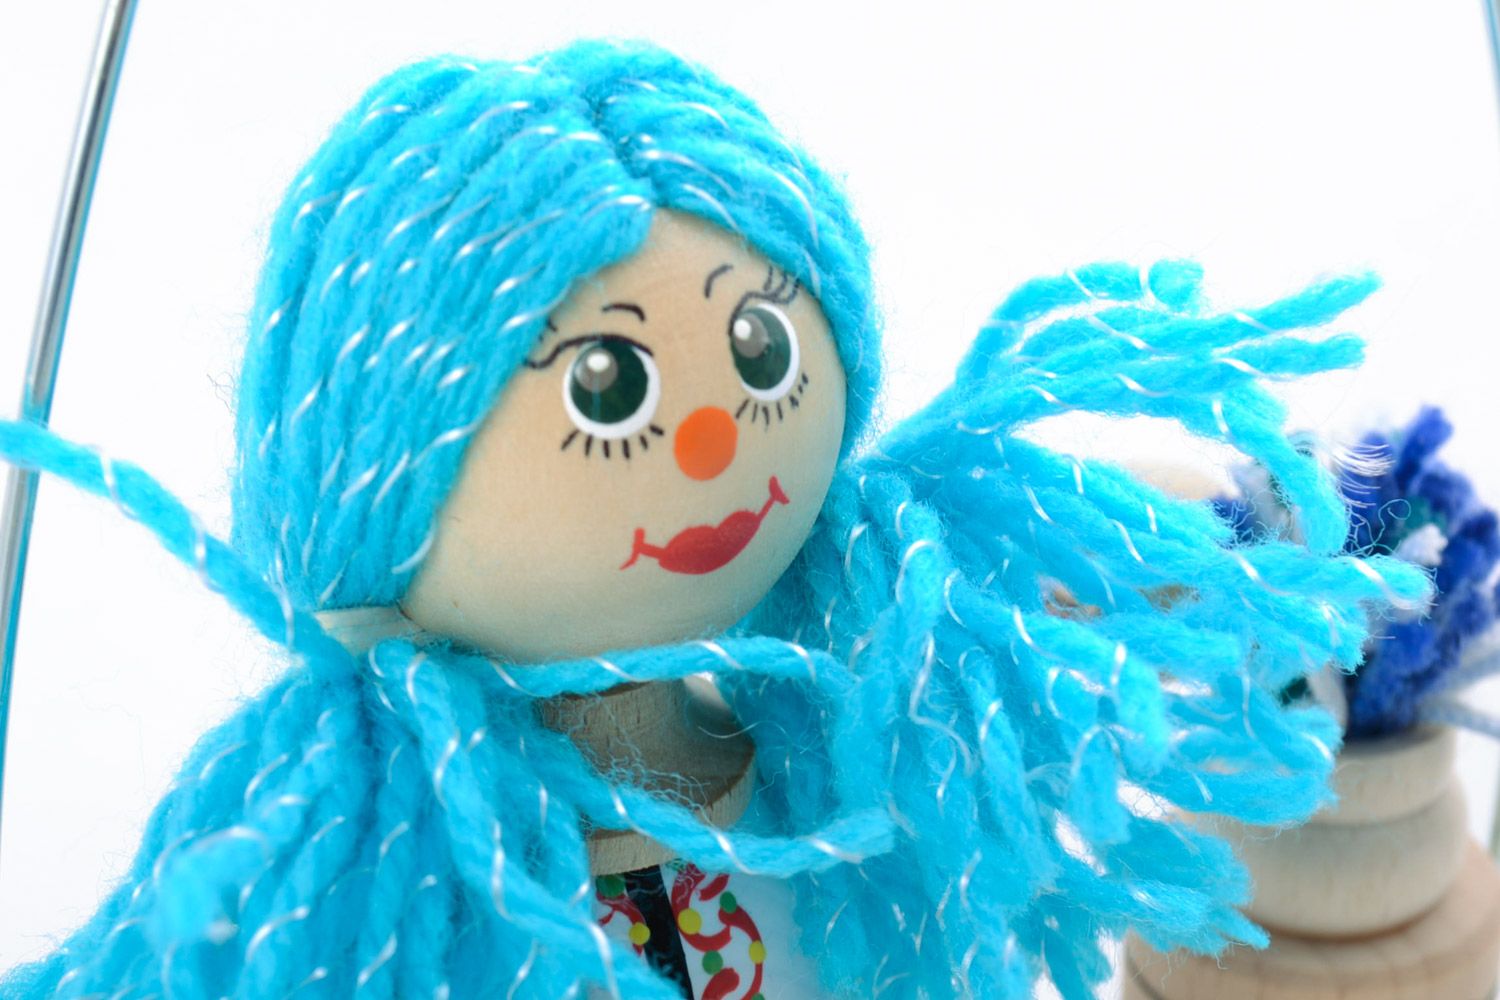 Handmade painted wooden eco toy girl with blue hair for children and interior photo 3